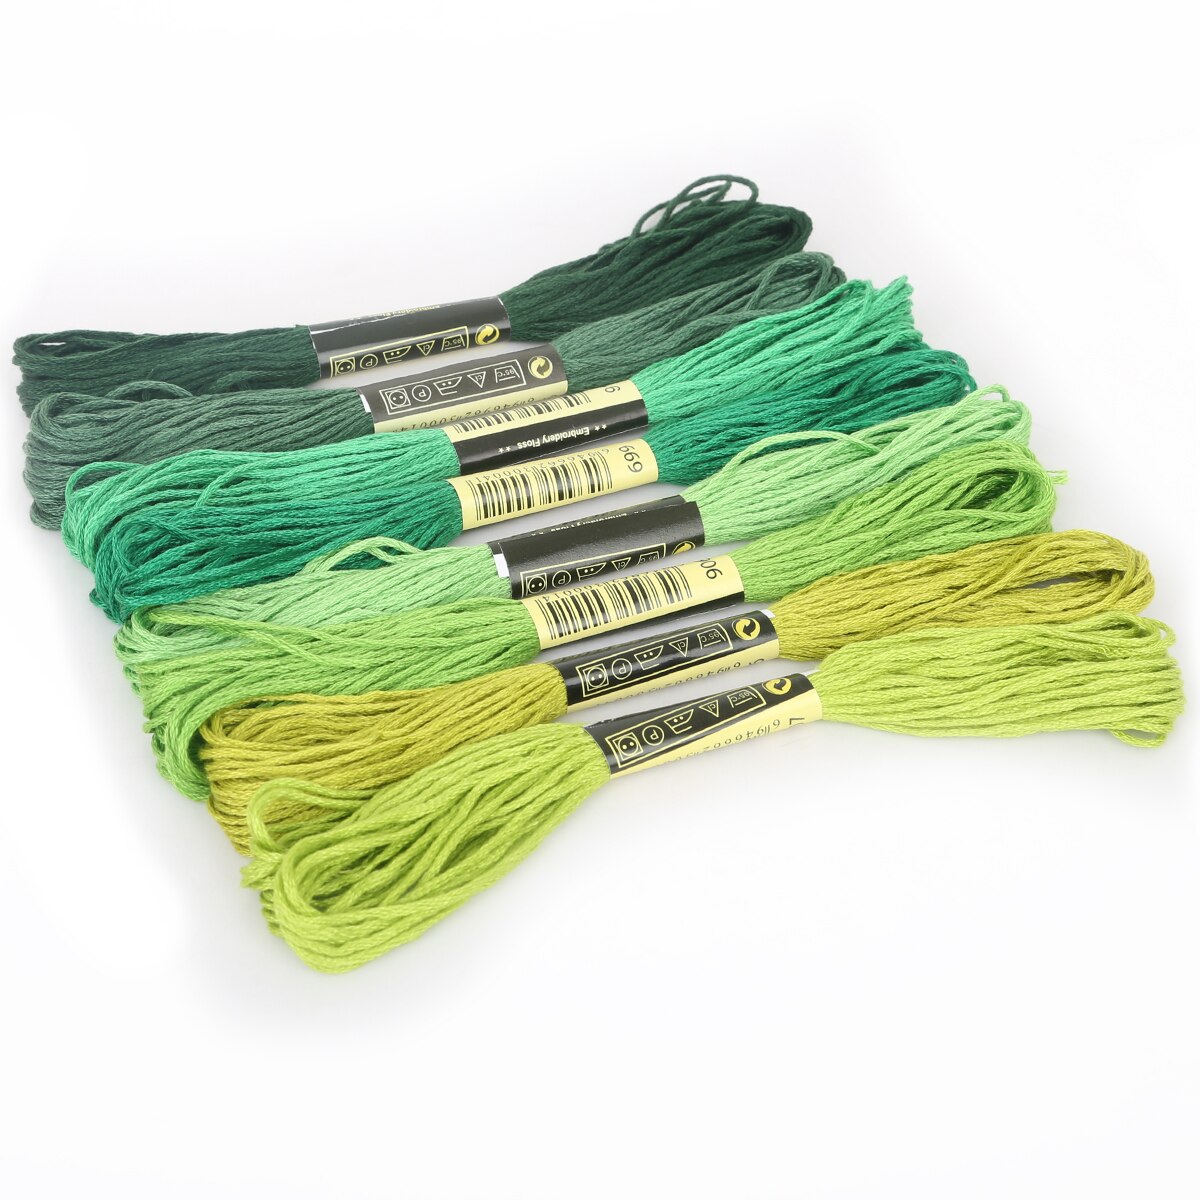 8pcs / bag per small bar 7.5m and Color cross stitch thread DIY clothing sewing supplies and fabrics: Green